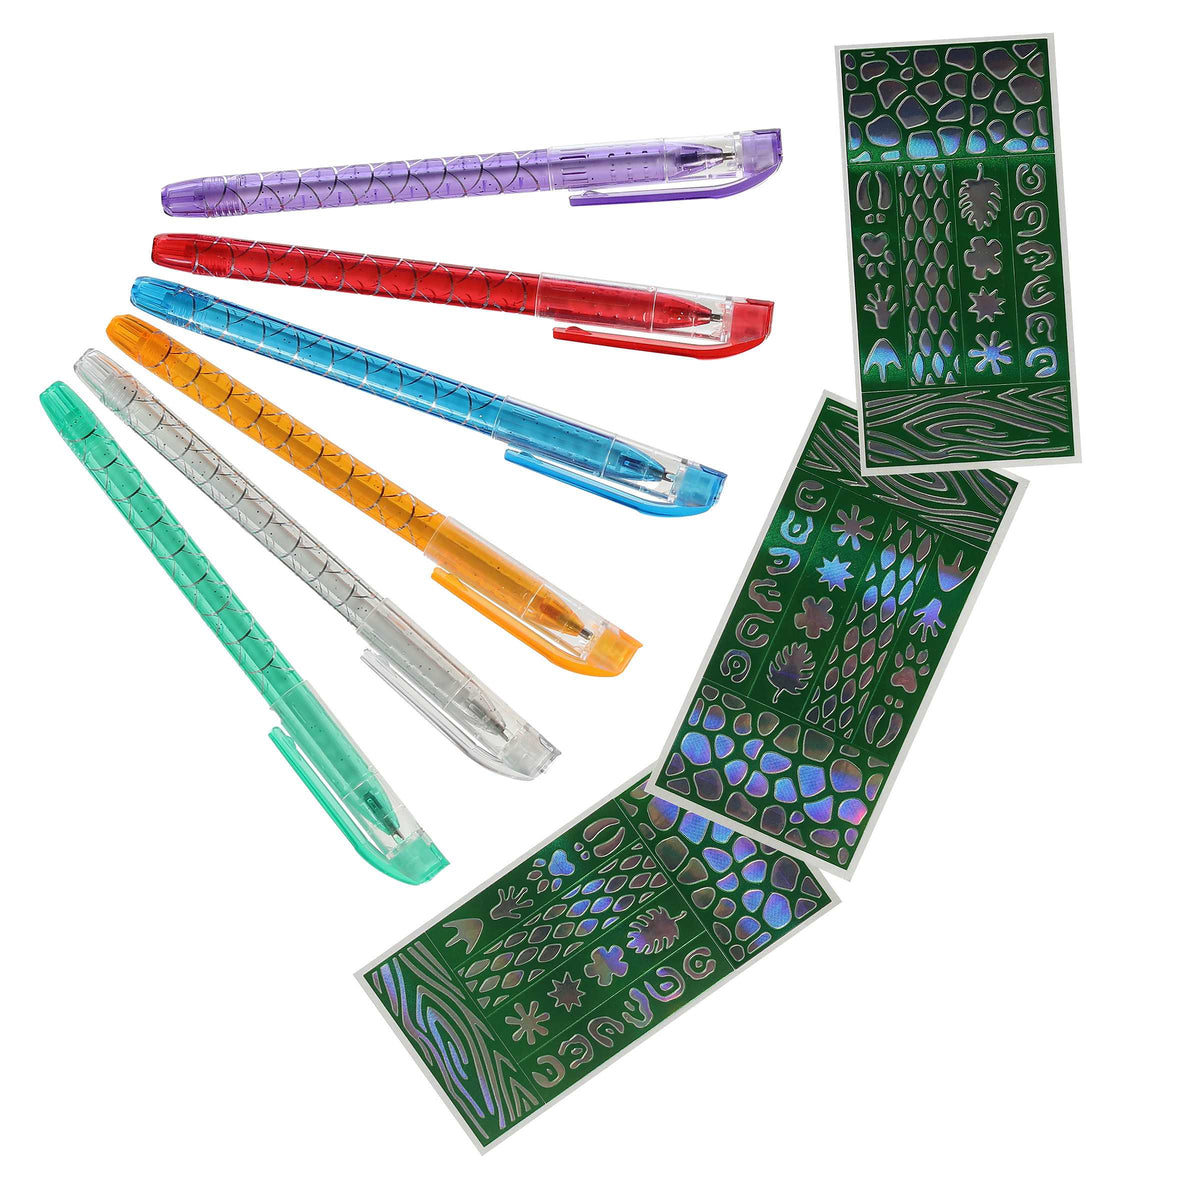 Glitter Zoo Tattoo Pens from Aurora Toys, safe and sparkly with wildlife stencils, ideal for parties or creative play.